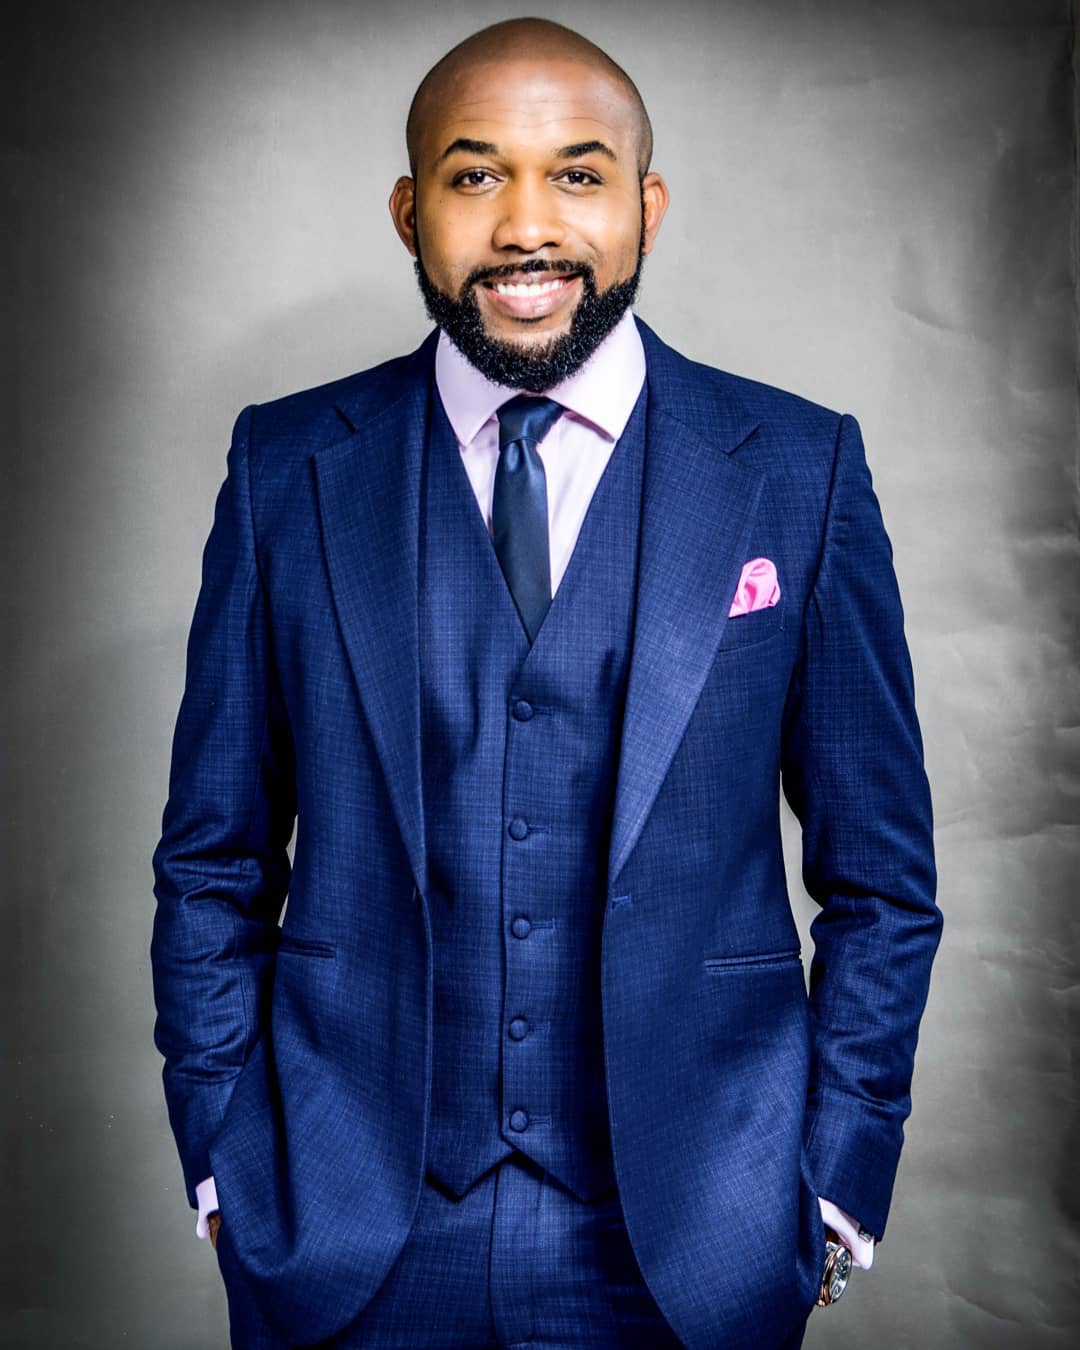 Banky W moved to Nigeria in 2008 with the aim of promoting African music to the world